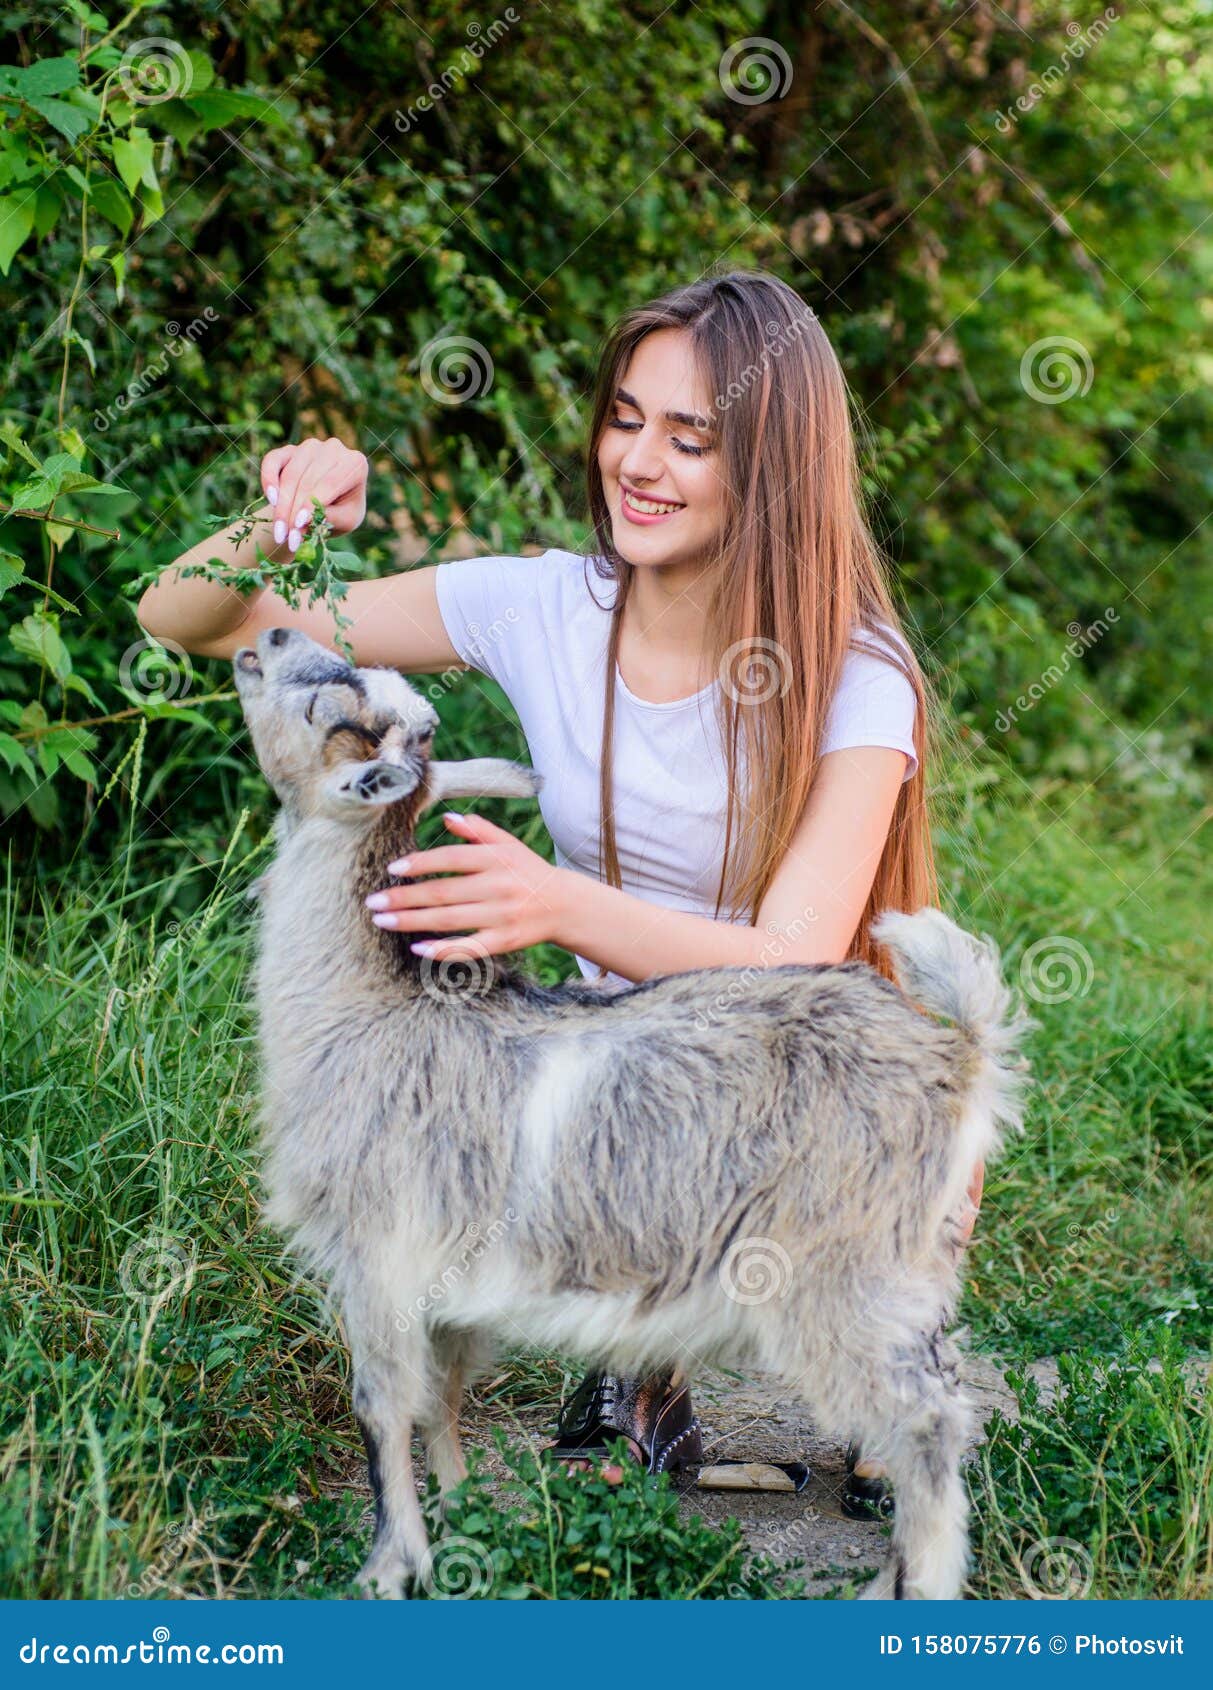 Feeding Animal. Animals Law. Woman and Small Goat Green Grass. Farm and  Farming Concept. Village Animals Stock Photo - Image of nature, health:  158075776